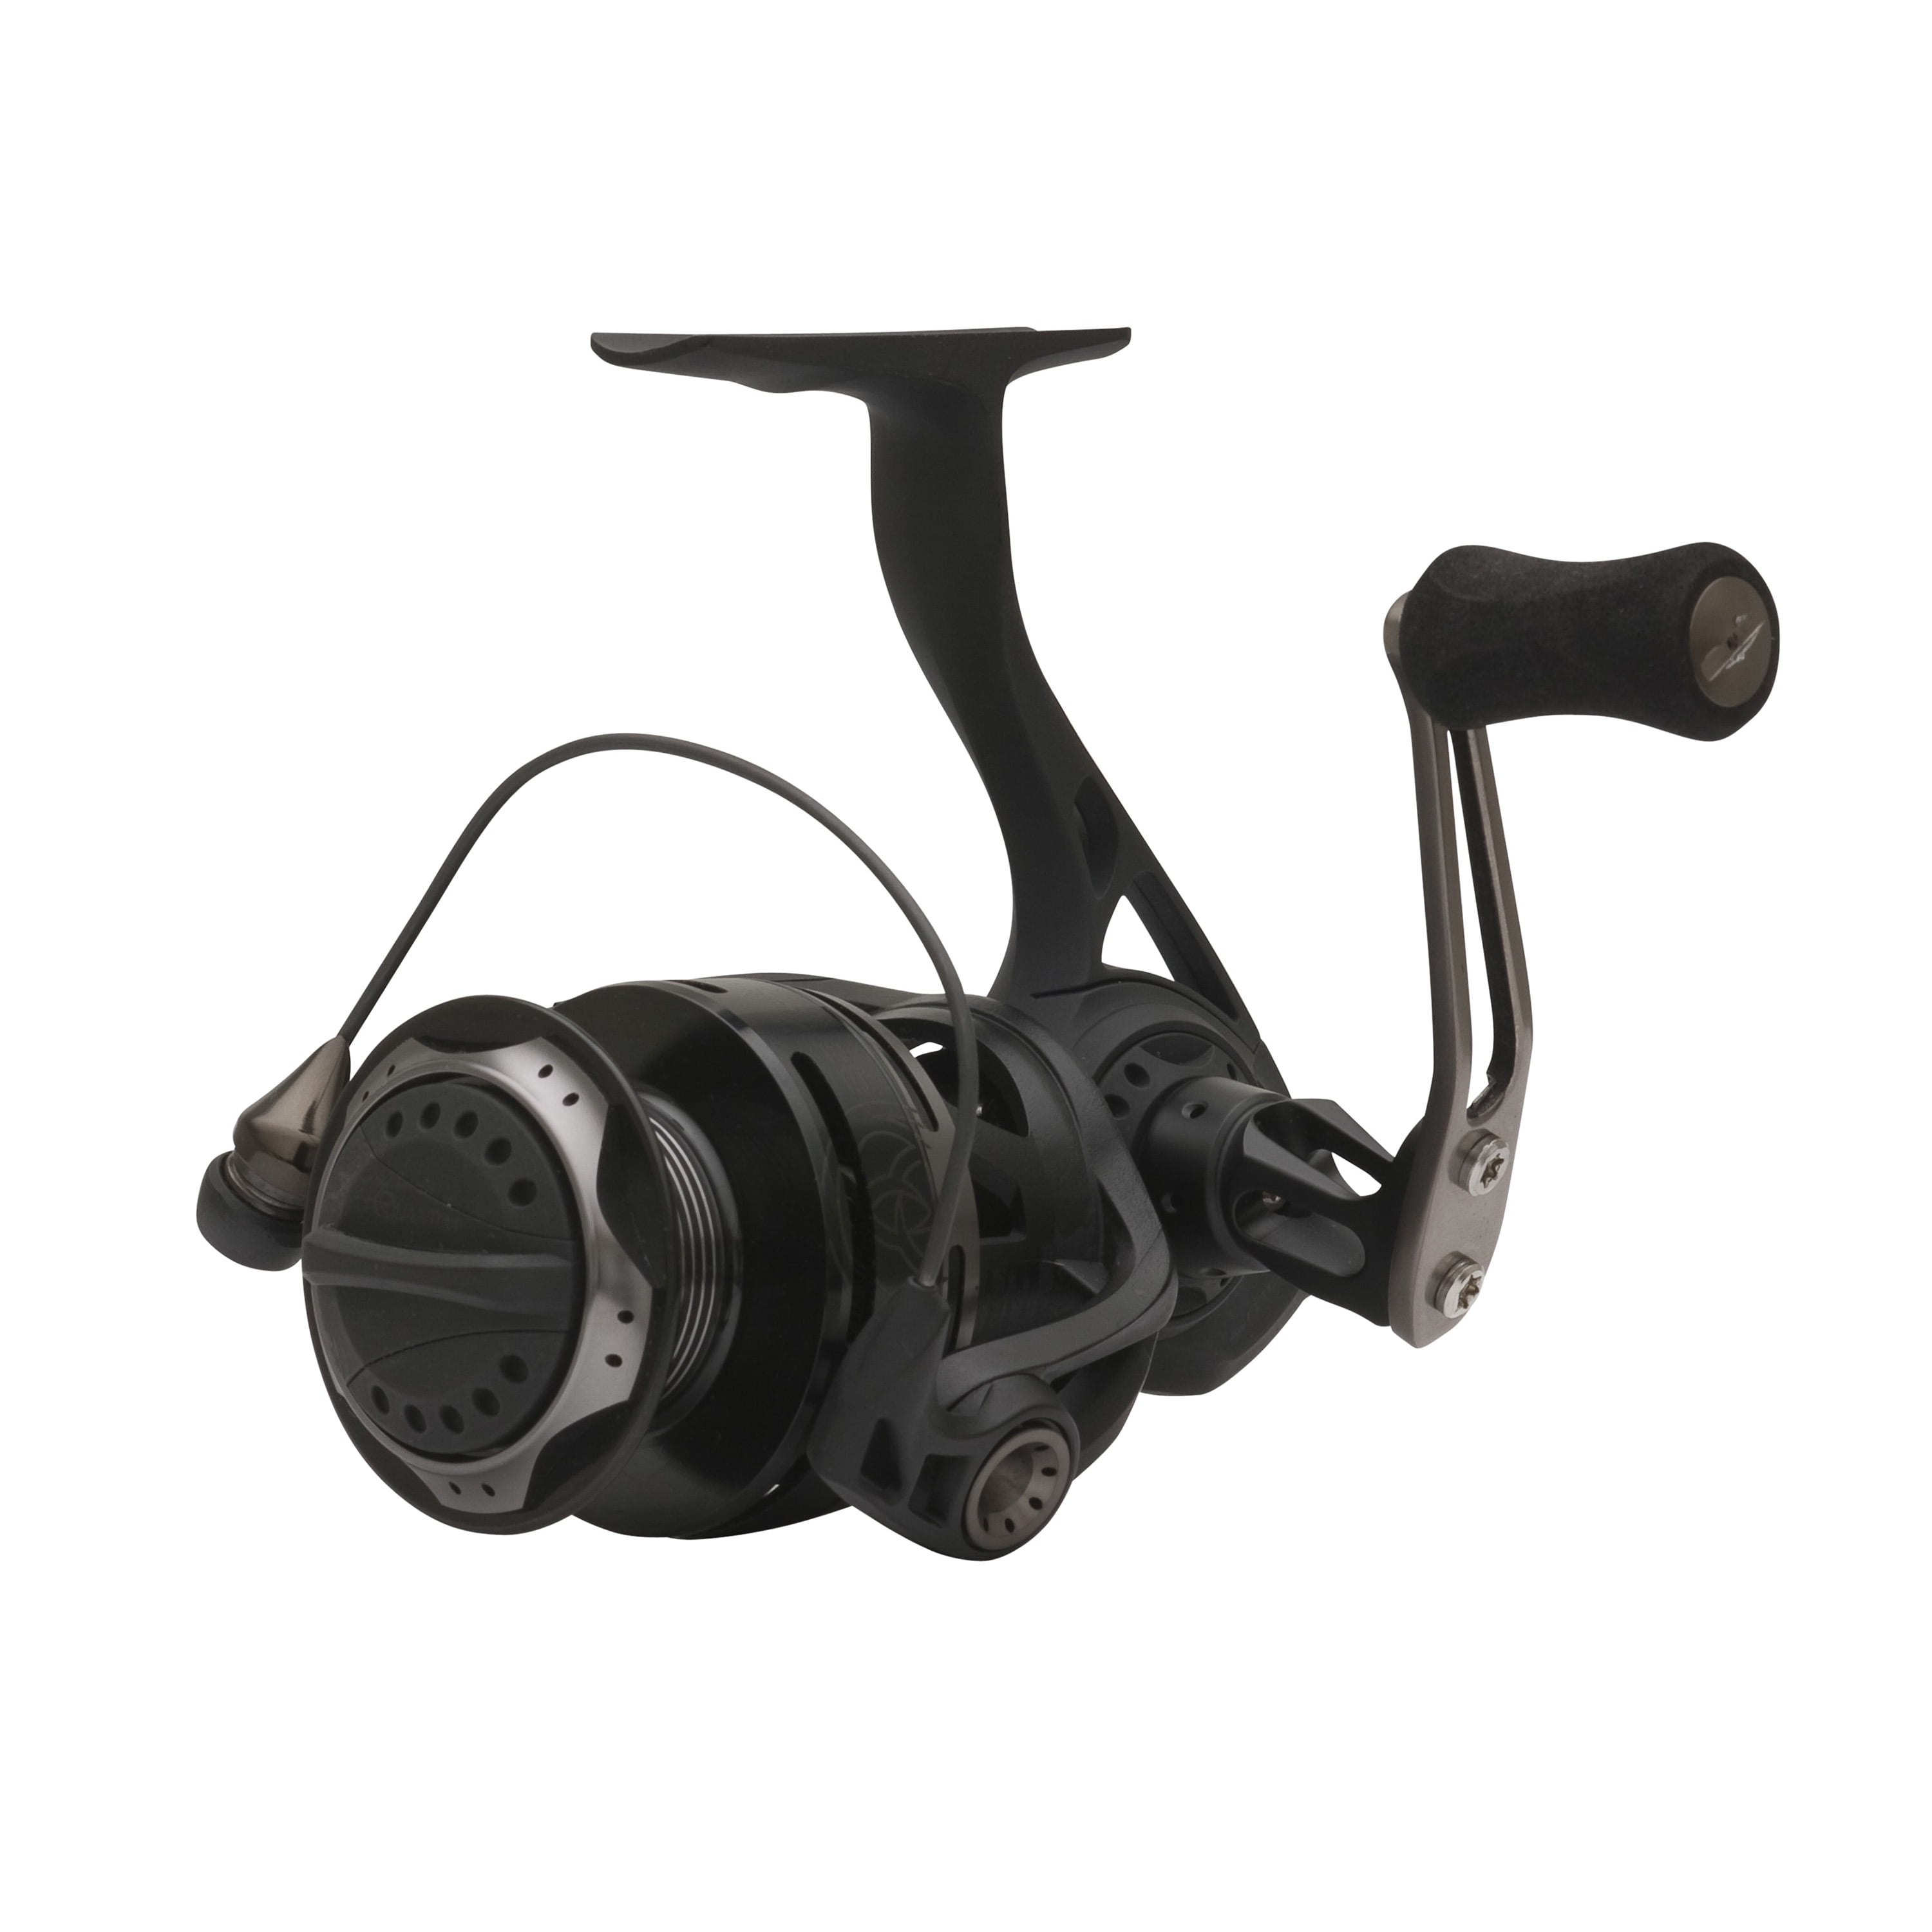 Quantum Smoke Spinning Fishing Reel, Size 30 Reel, Changeable Right- or  Left-Hand Retrieve, Continuous Anti-Reverse Clutch with NiTi Indestructible  Bail, SCR Alloy Frame, 6.0:1 Gear Ratio, Black 